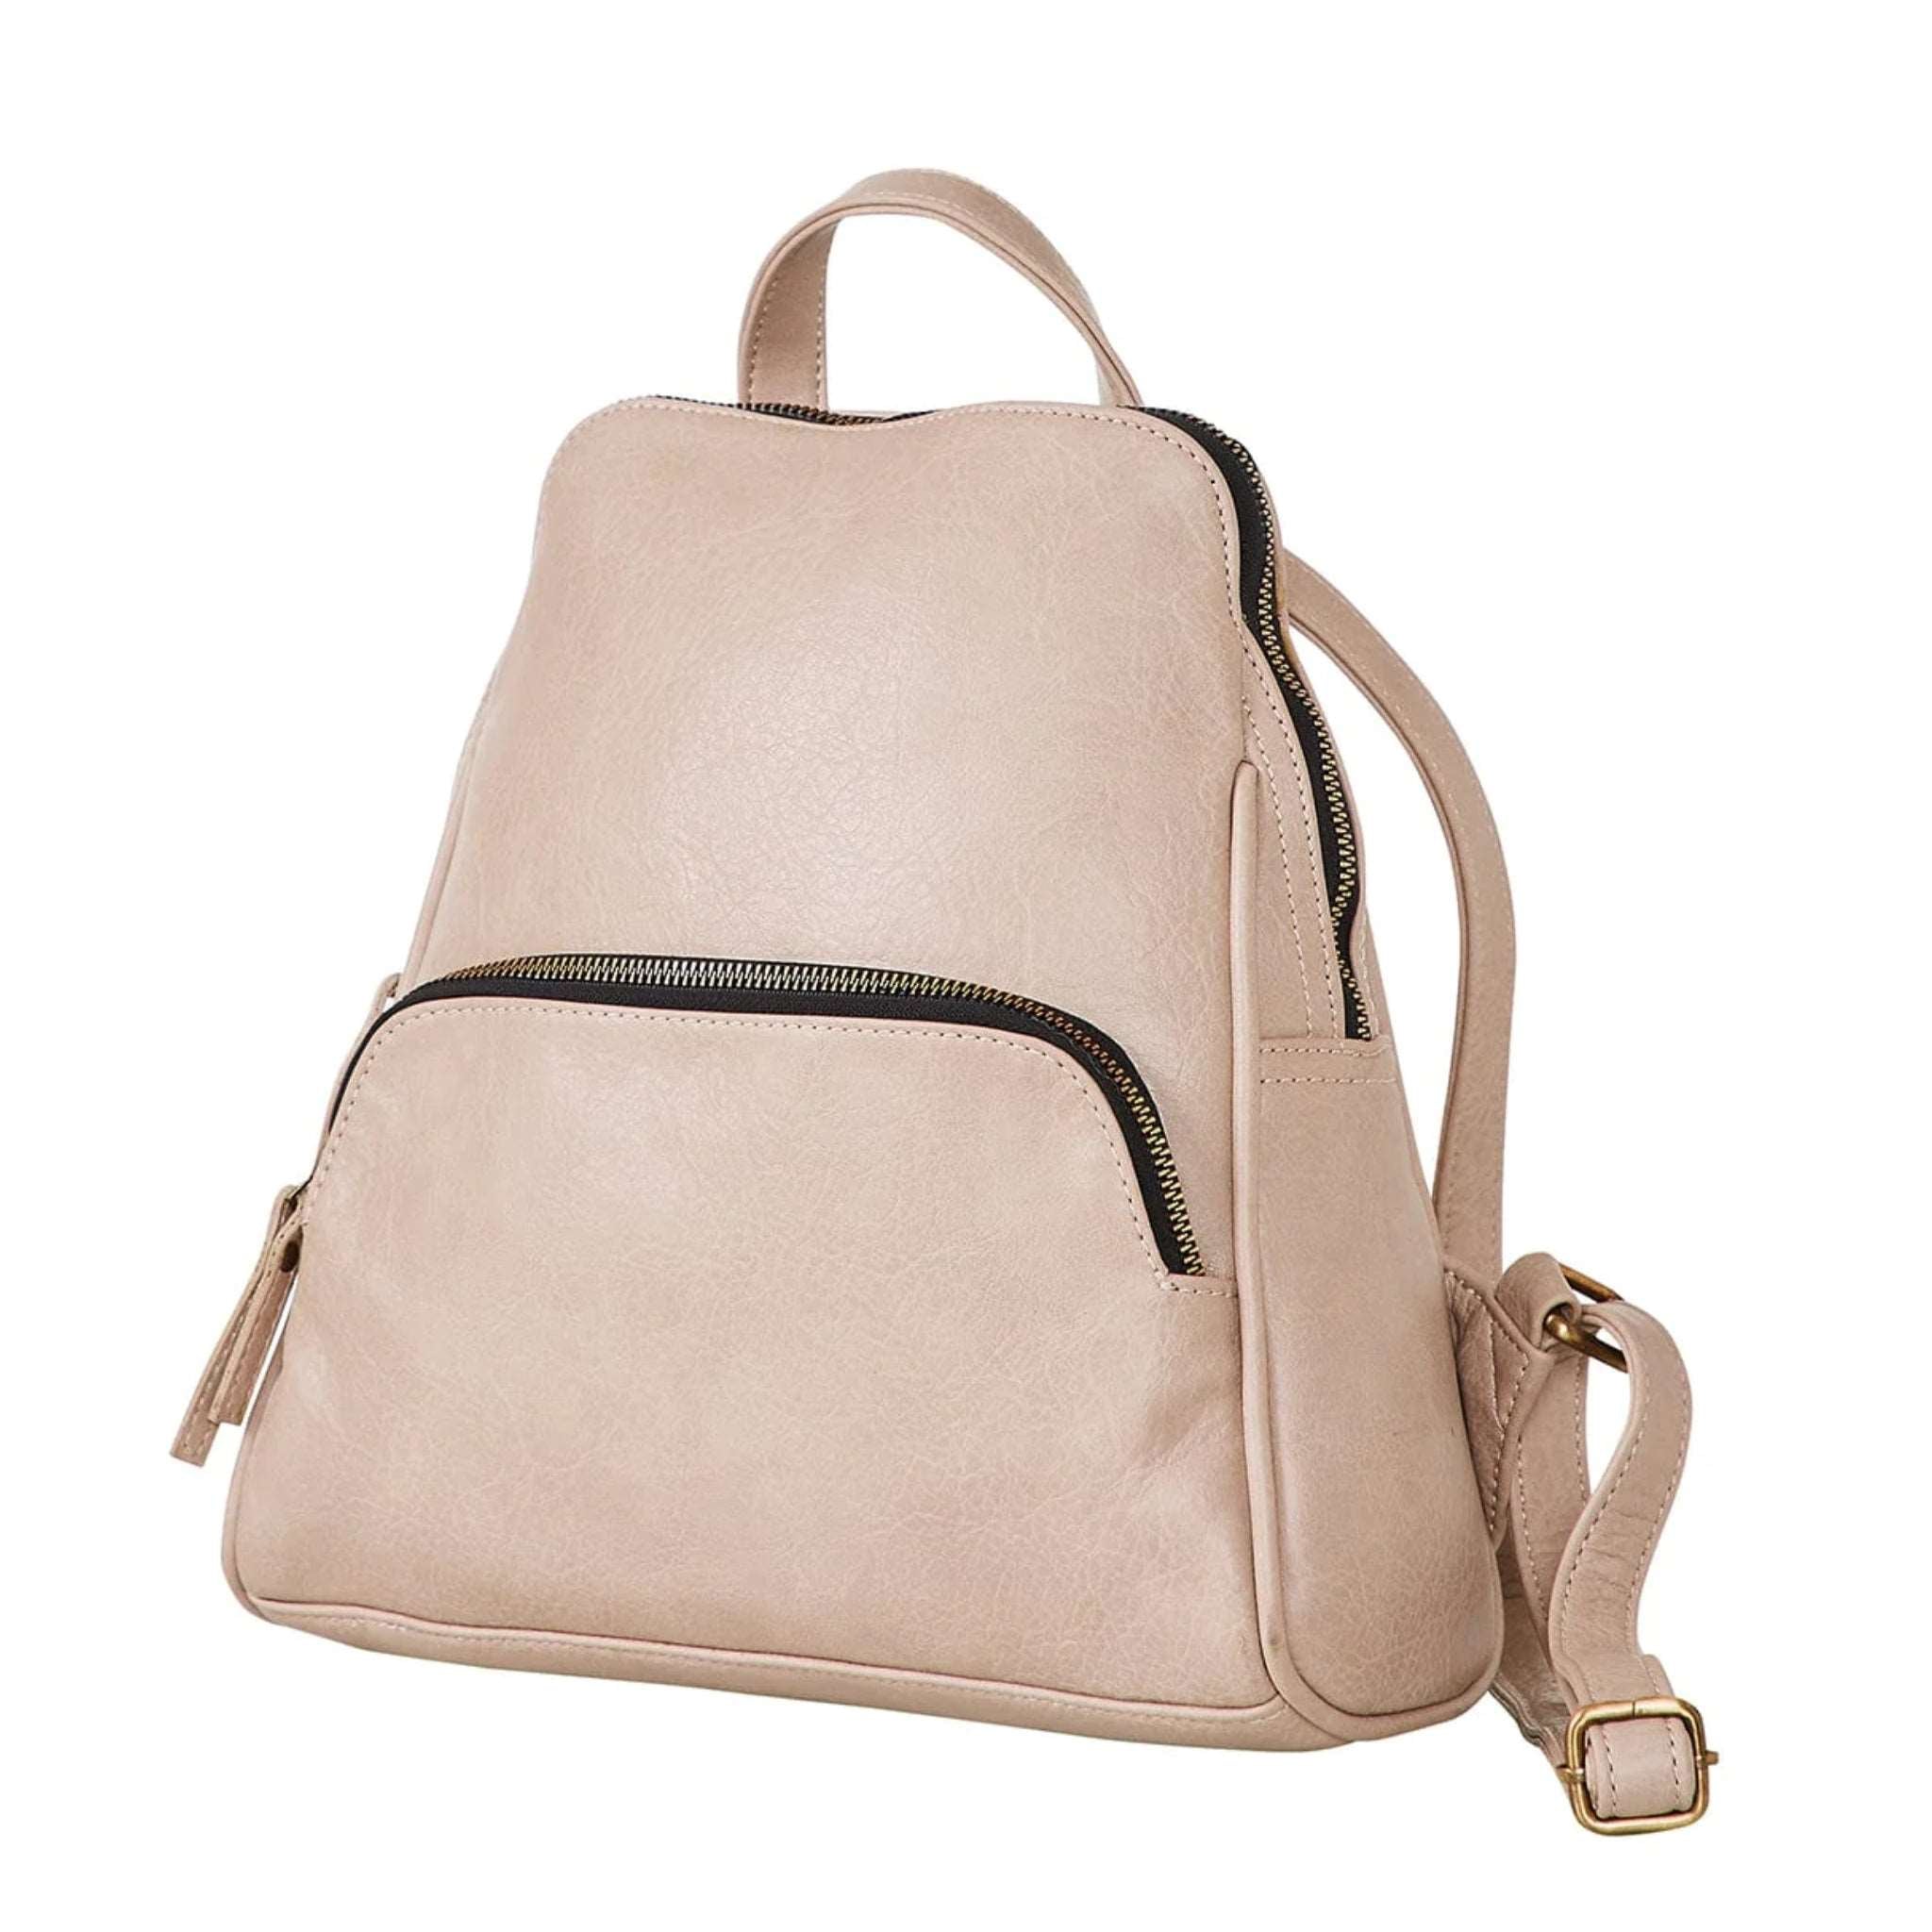 Mona B Convertible Backpack for Offices Schools and Colleges with Stylish Design for Women: Grace (Nude) - (SH-110 NUD)